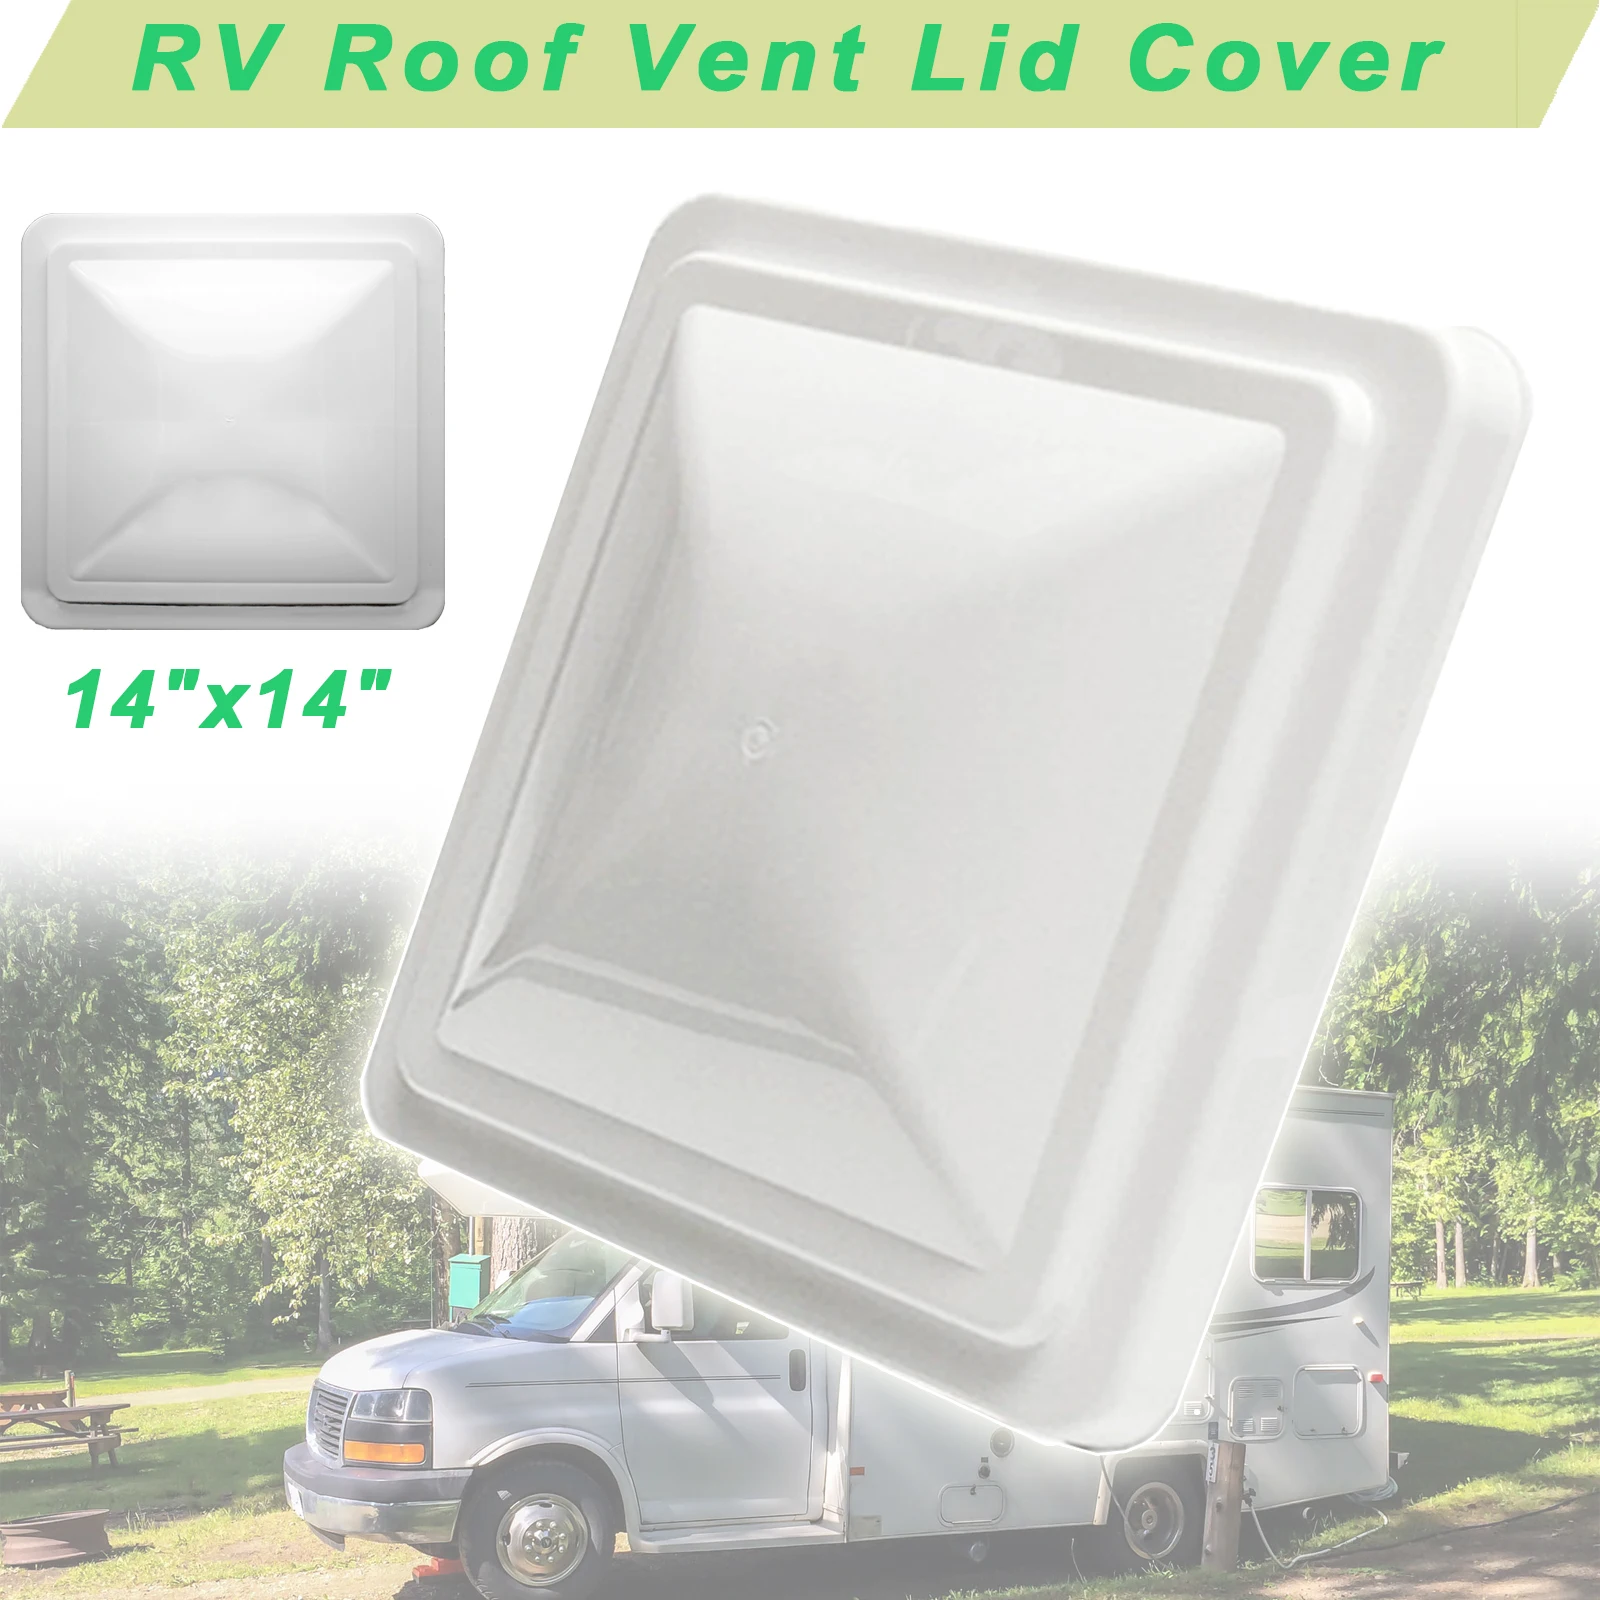 

14"x14" Universal Replacement RV Roof Vent Cover White Vent Lid for Camper Trailer Motorhome White PP Plastic UV-resistant Cover